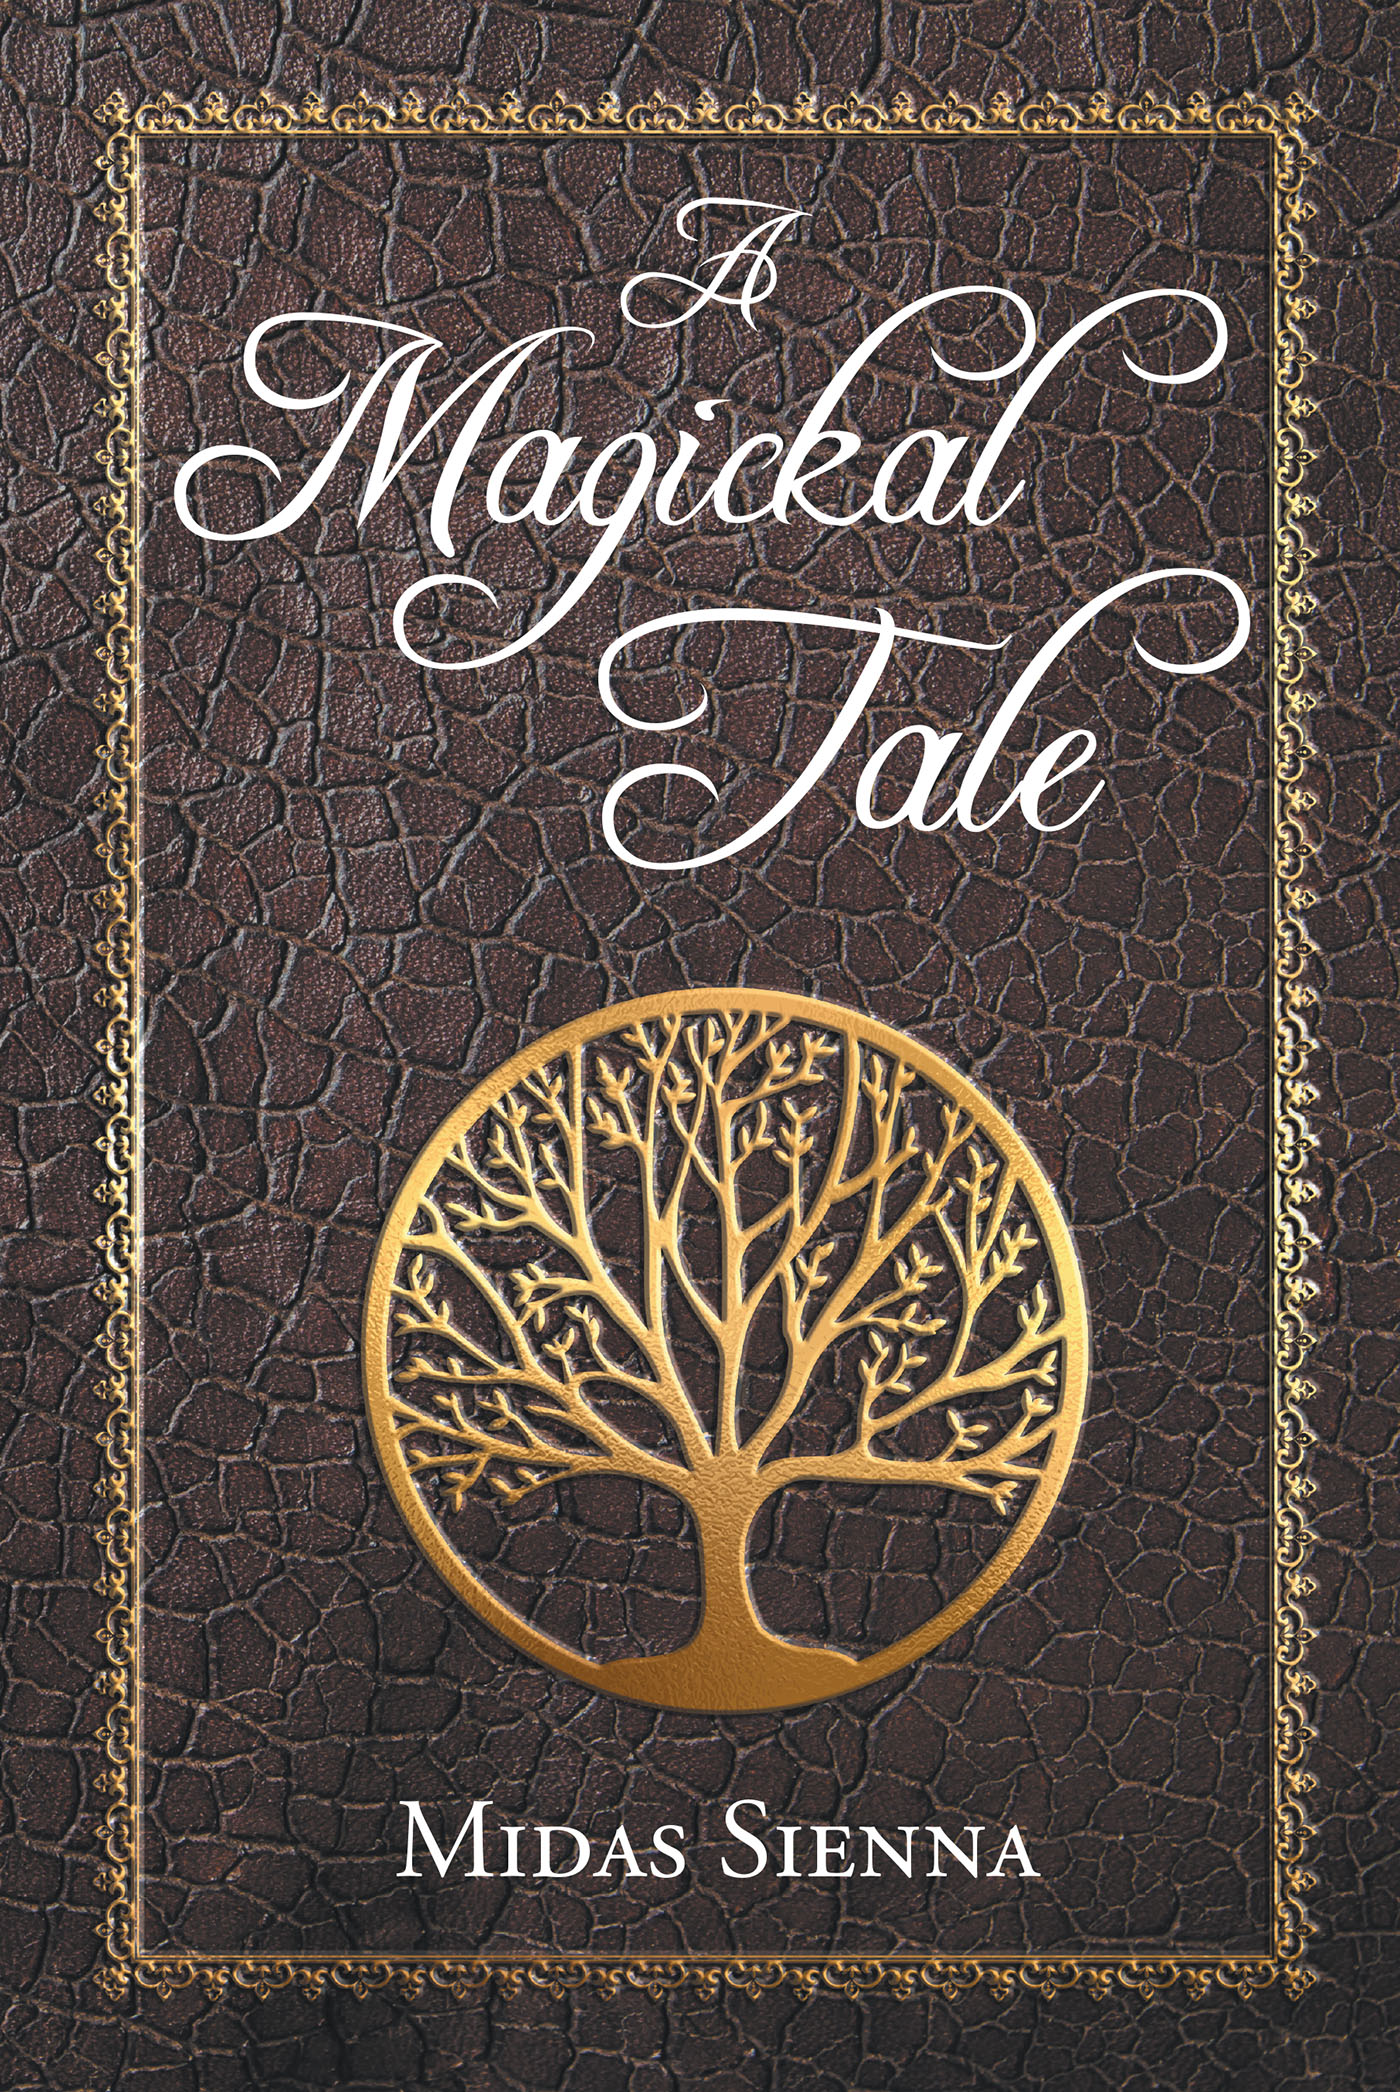 Author Midas Sienna’s New Book, "A Magickal Tale," is a Spellbinding Work of Fantasy Fiction Following a Young Woman on Her Journey Toward an Otherworldly Destiny